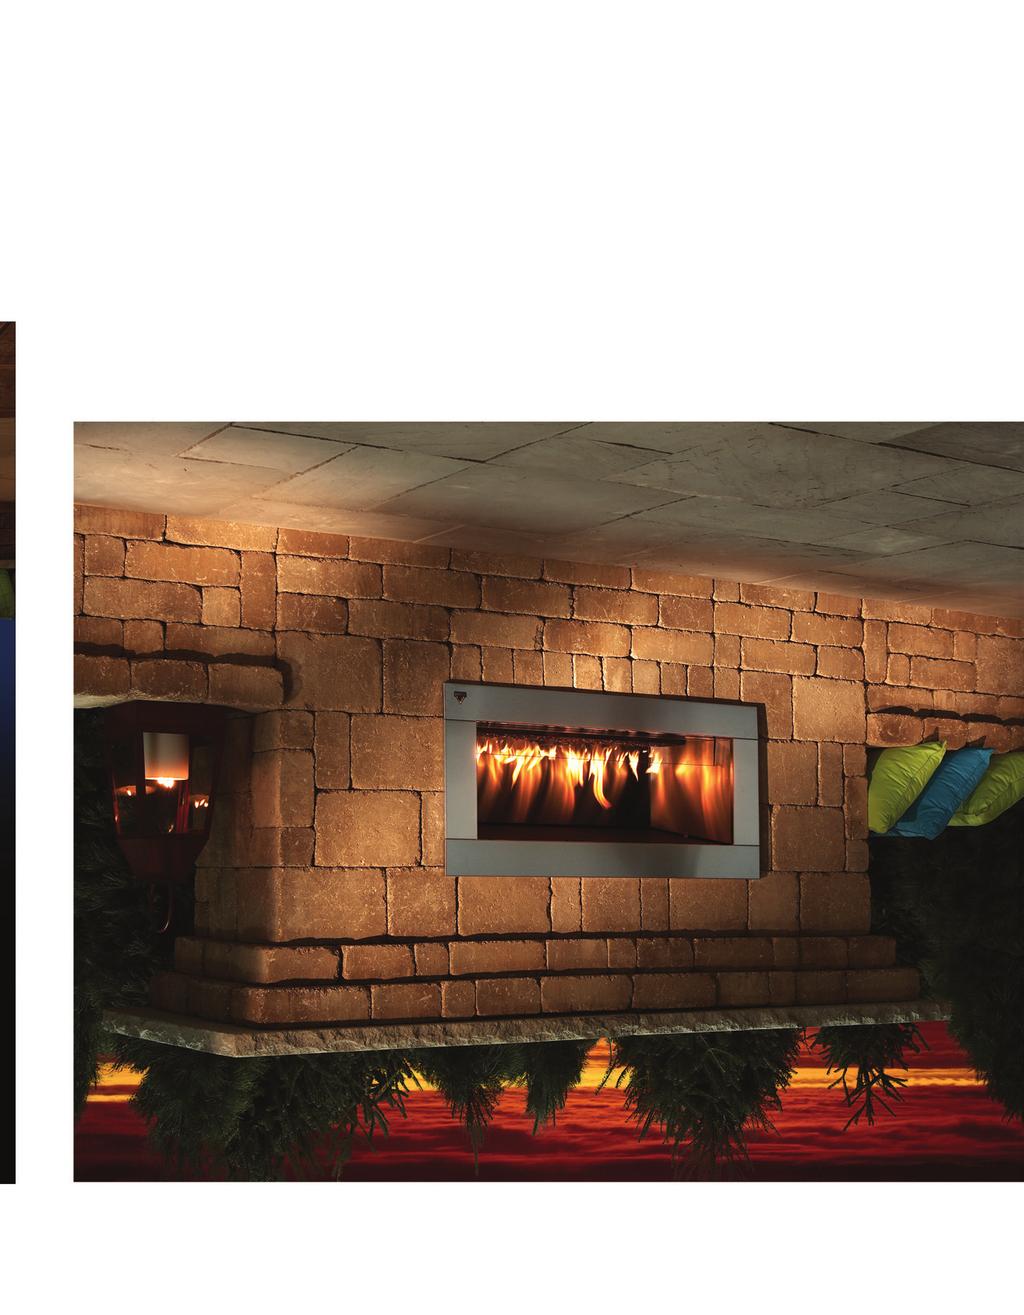 contemporary gas fireplace kit The clean lines and simple profile of the Contemporary Fireplace Kit create a